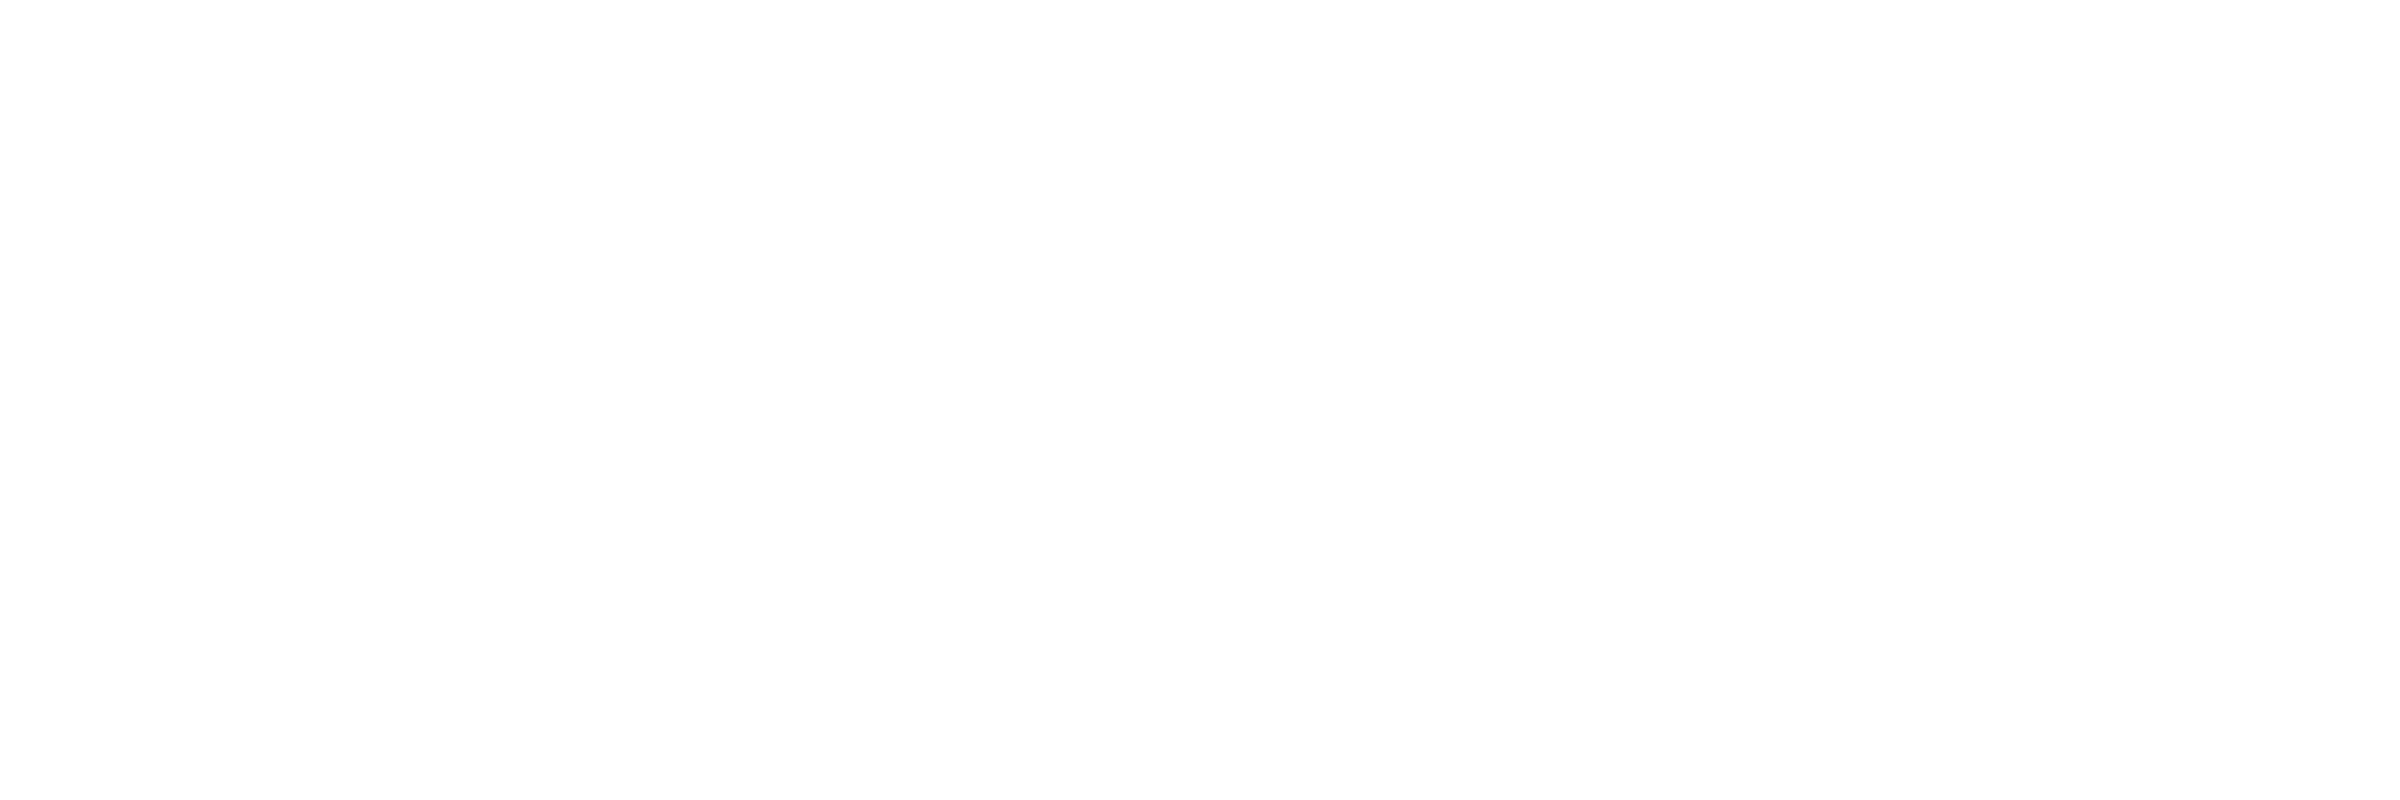 bodyright - Own your body online | Bodily Integrity | UNFPA